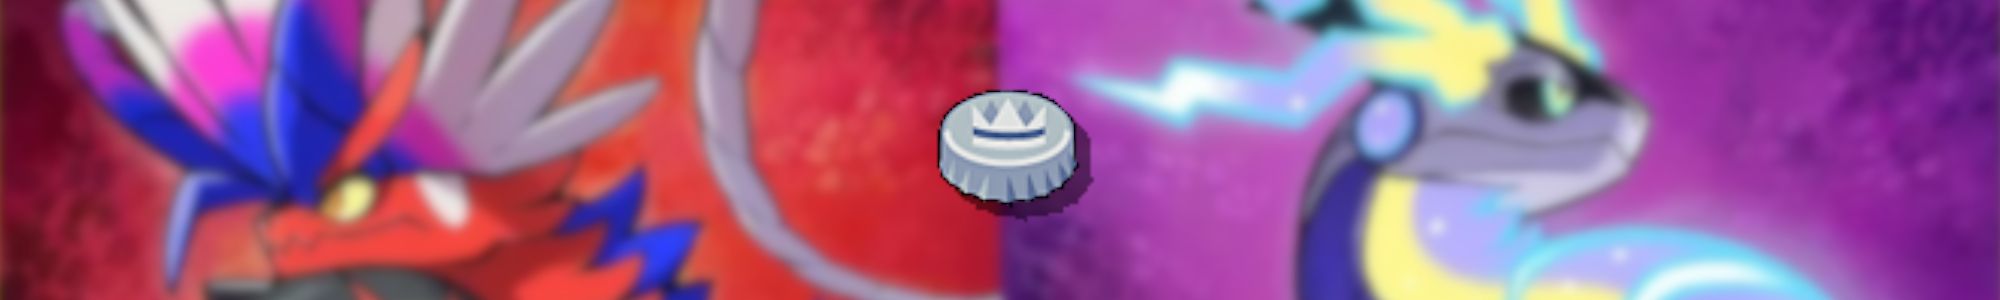 Image of Koraidon and Miraidon in the background and a Bottle Cap in the foreground from Pokemon Scarlet & Violet.